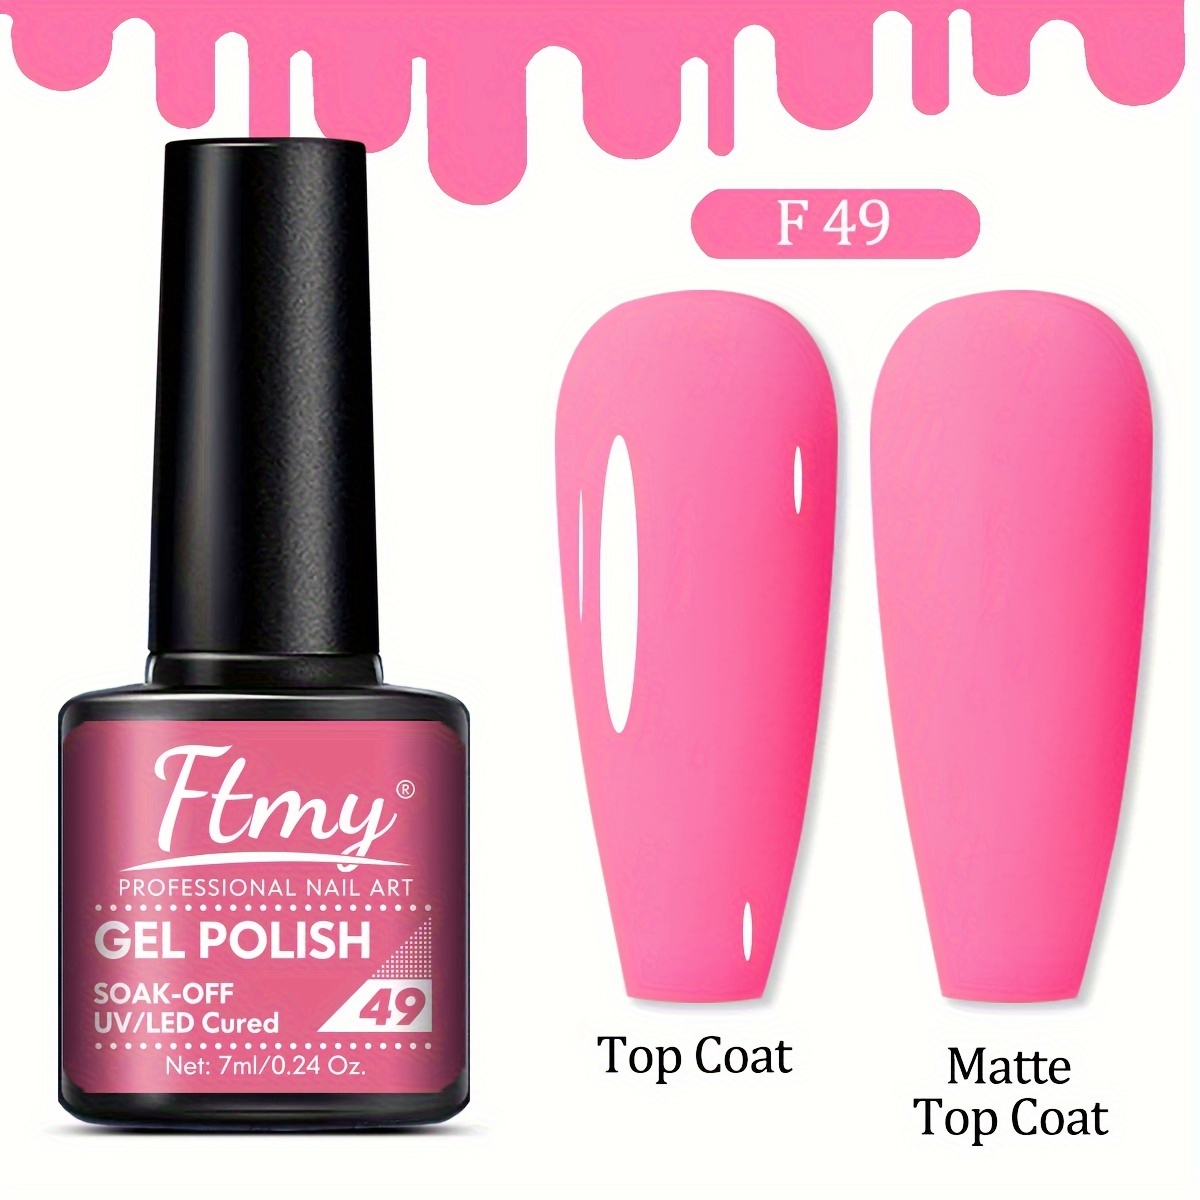 

Uv/led Cured Gel Nail Polish, Soak-off Nail Paint, Ideal For Manicure Enthusiasts, Multiple Colors For Mix & Match